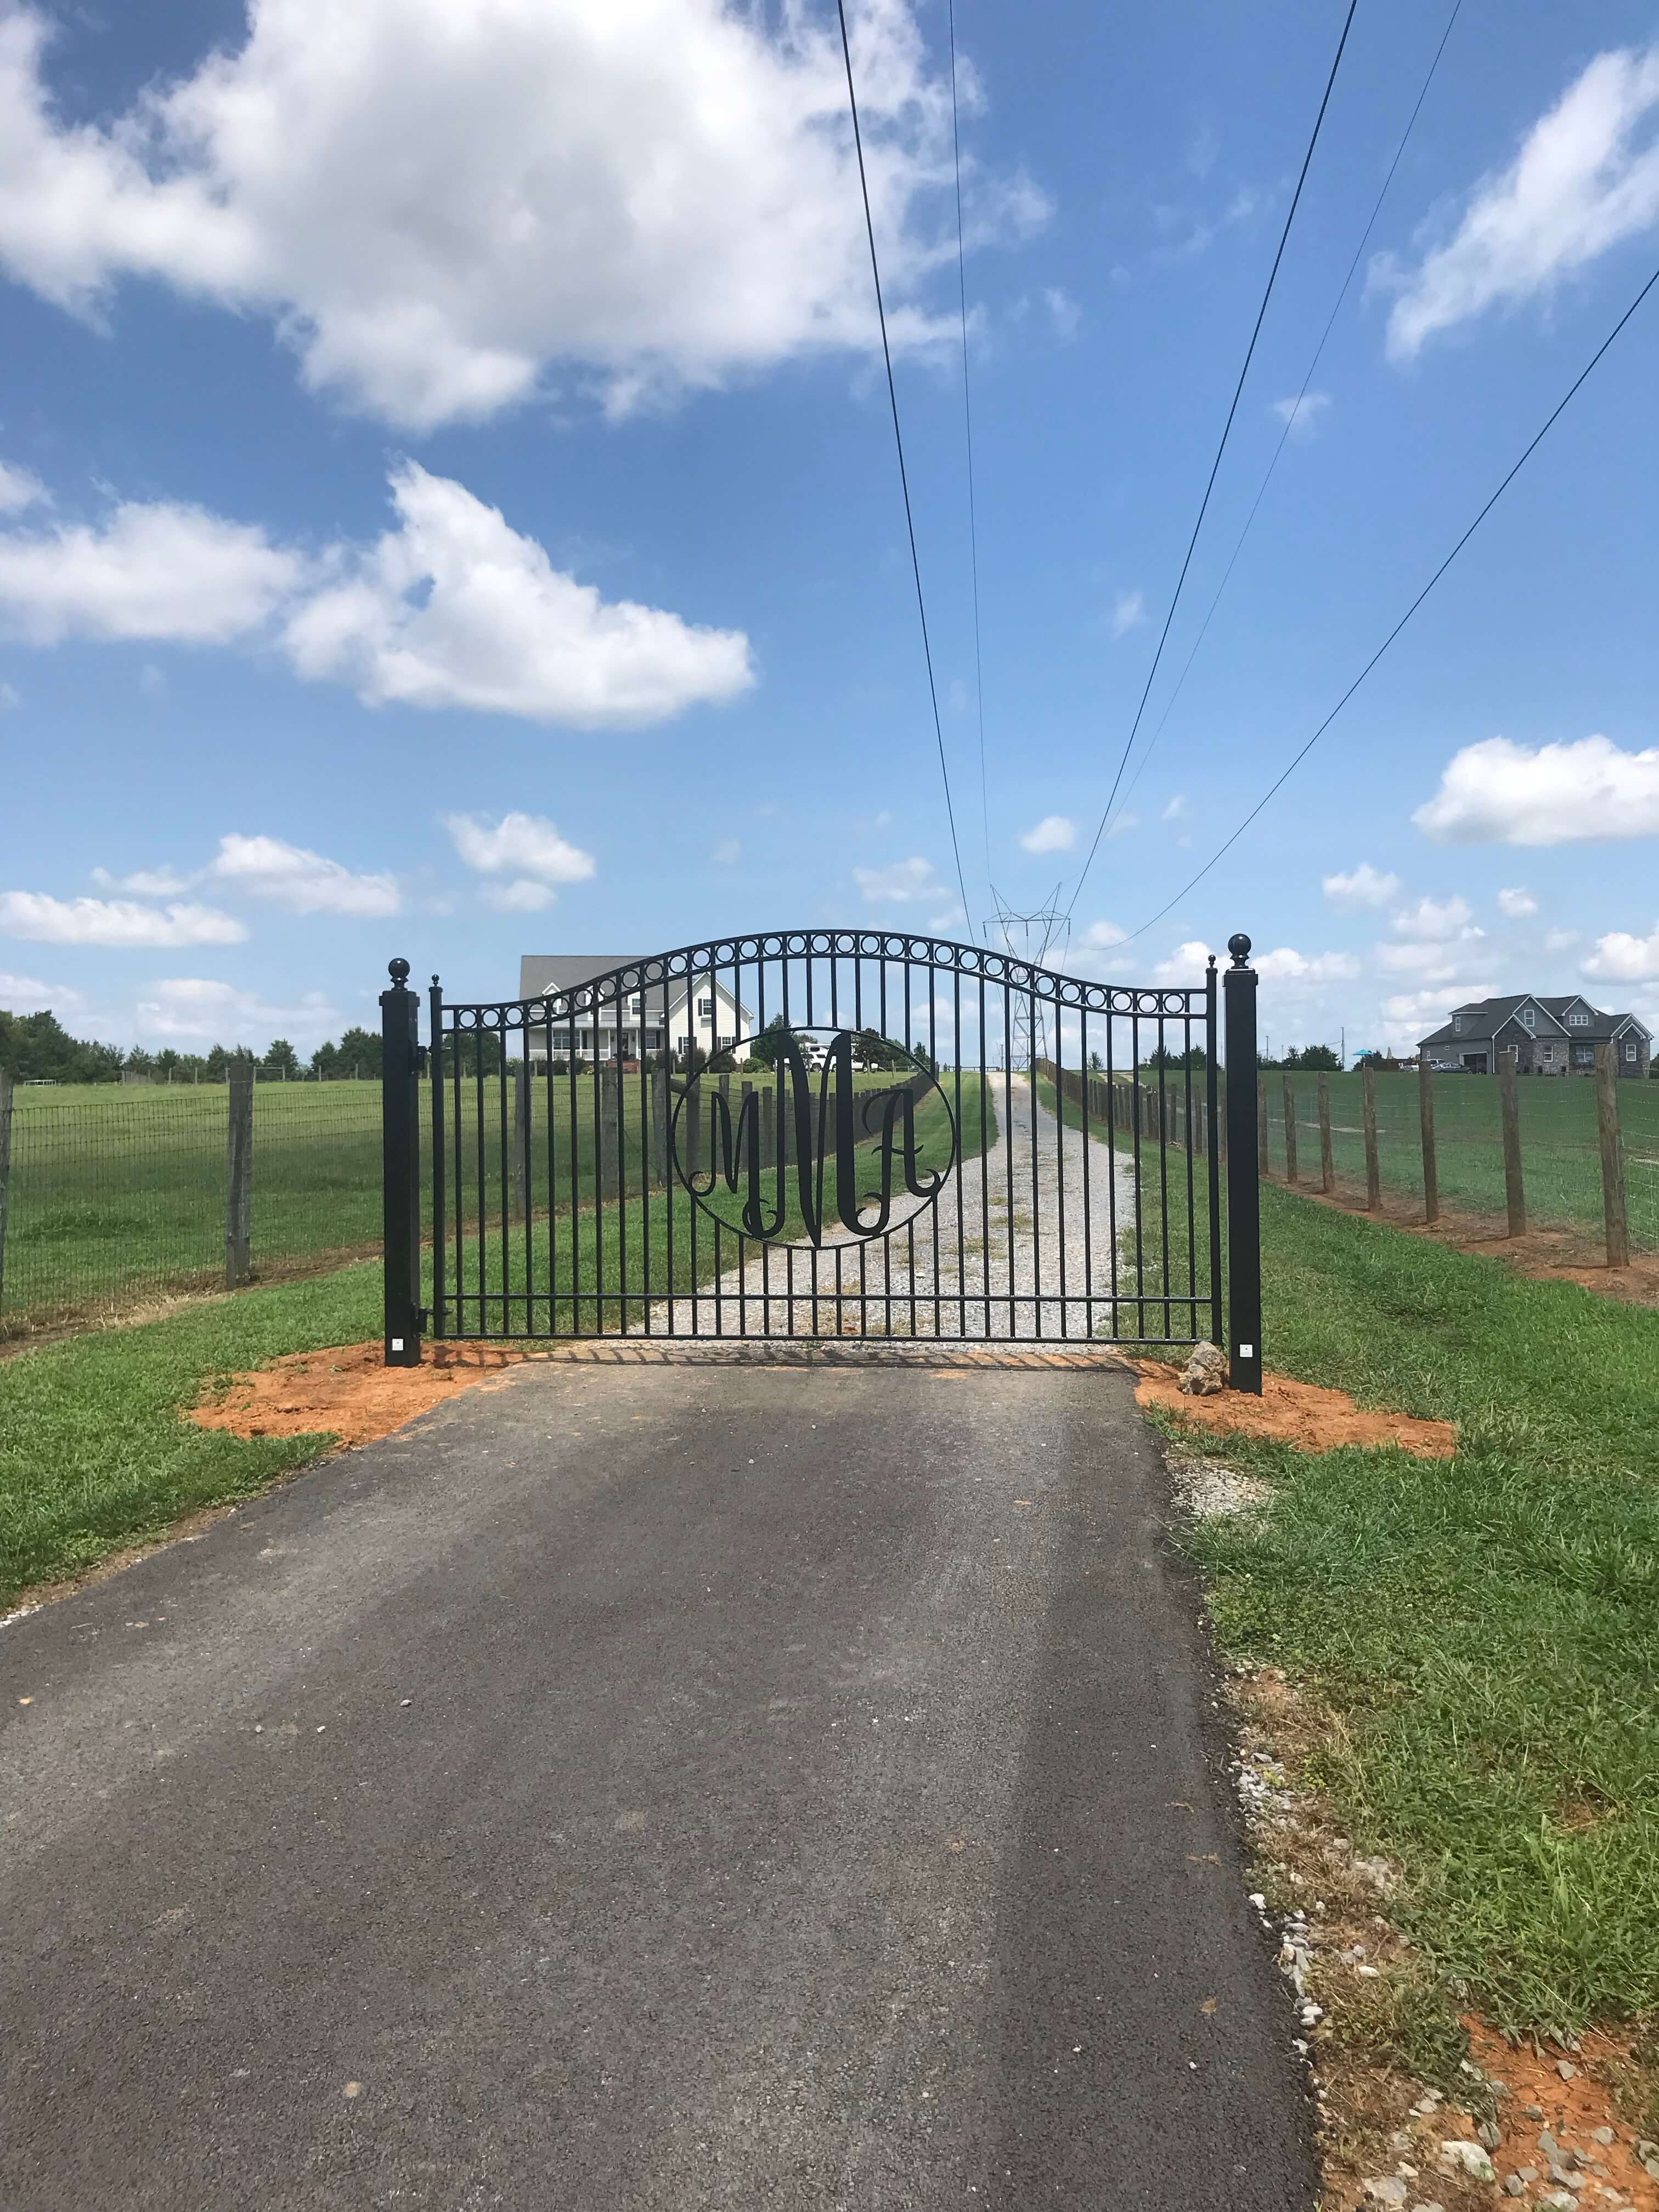 single black wrought iron gate with the  monomgram MMA in an oval in the middle in front of long road on flat green field of grass, big farmhouse in background and blue sky with clouds